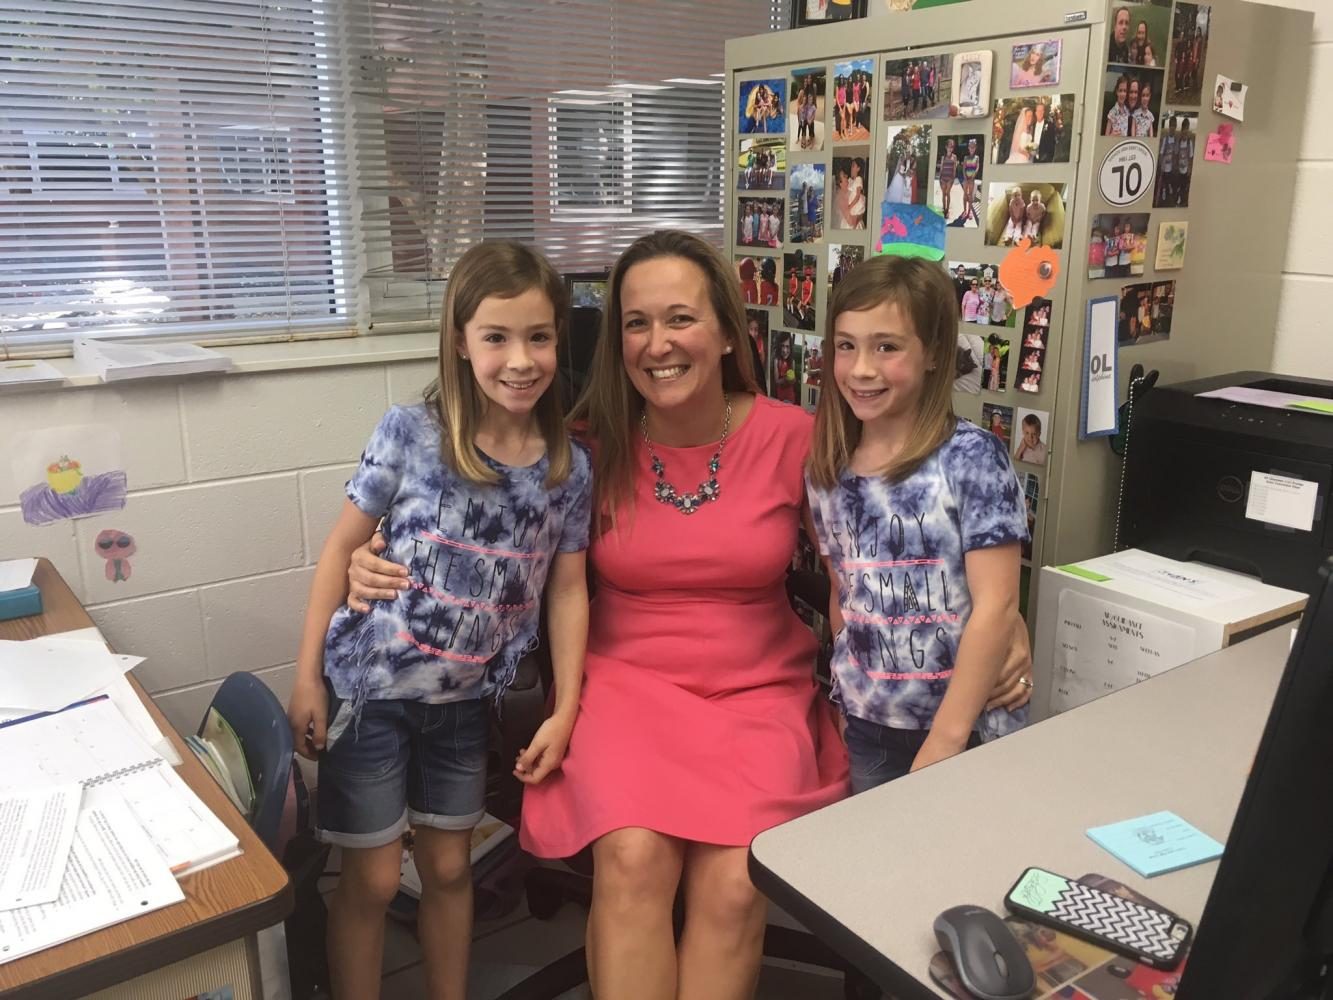 English teacher Jessica Schieble brought her twins, Lucy and Brianna, to her B day English classes